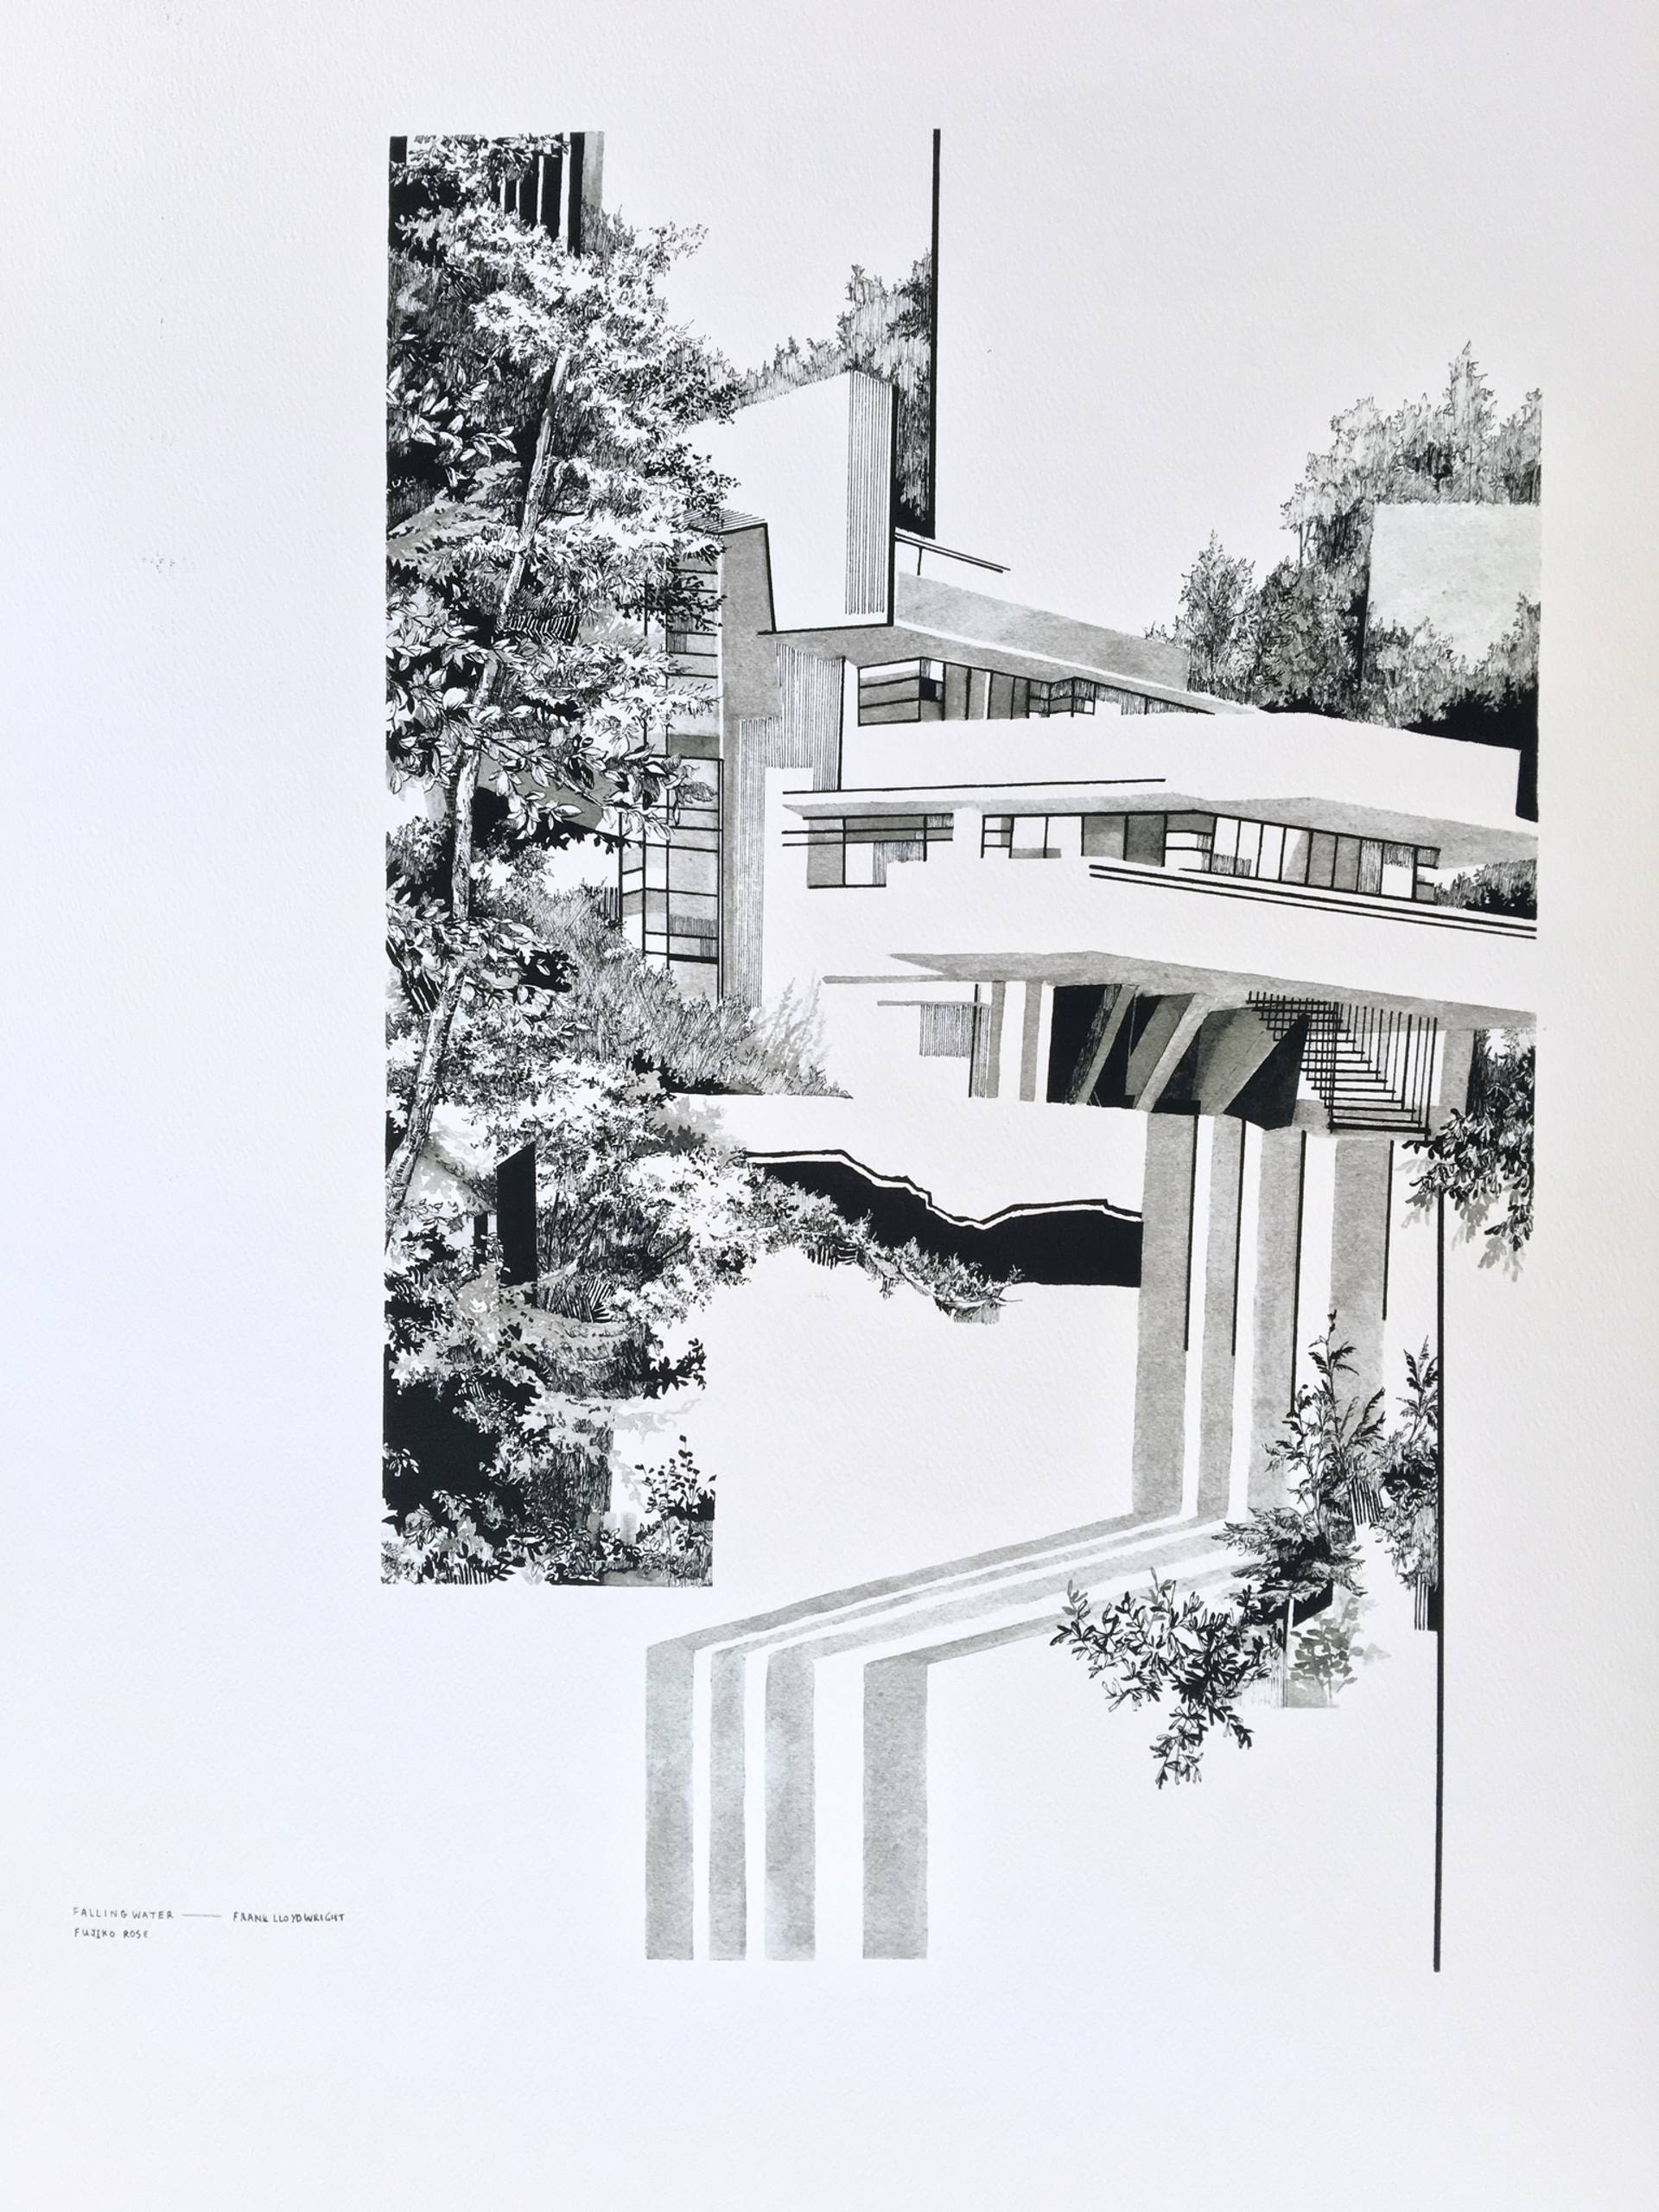 Falling Water Drawing at Explore collection of